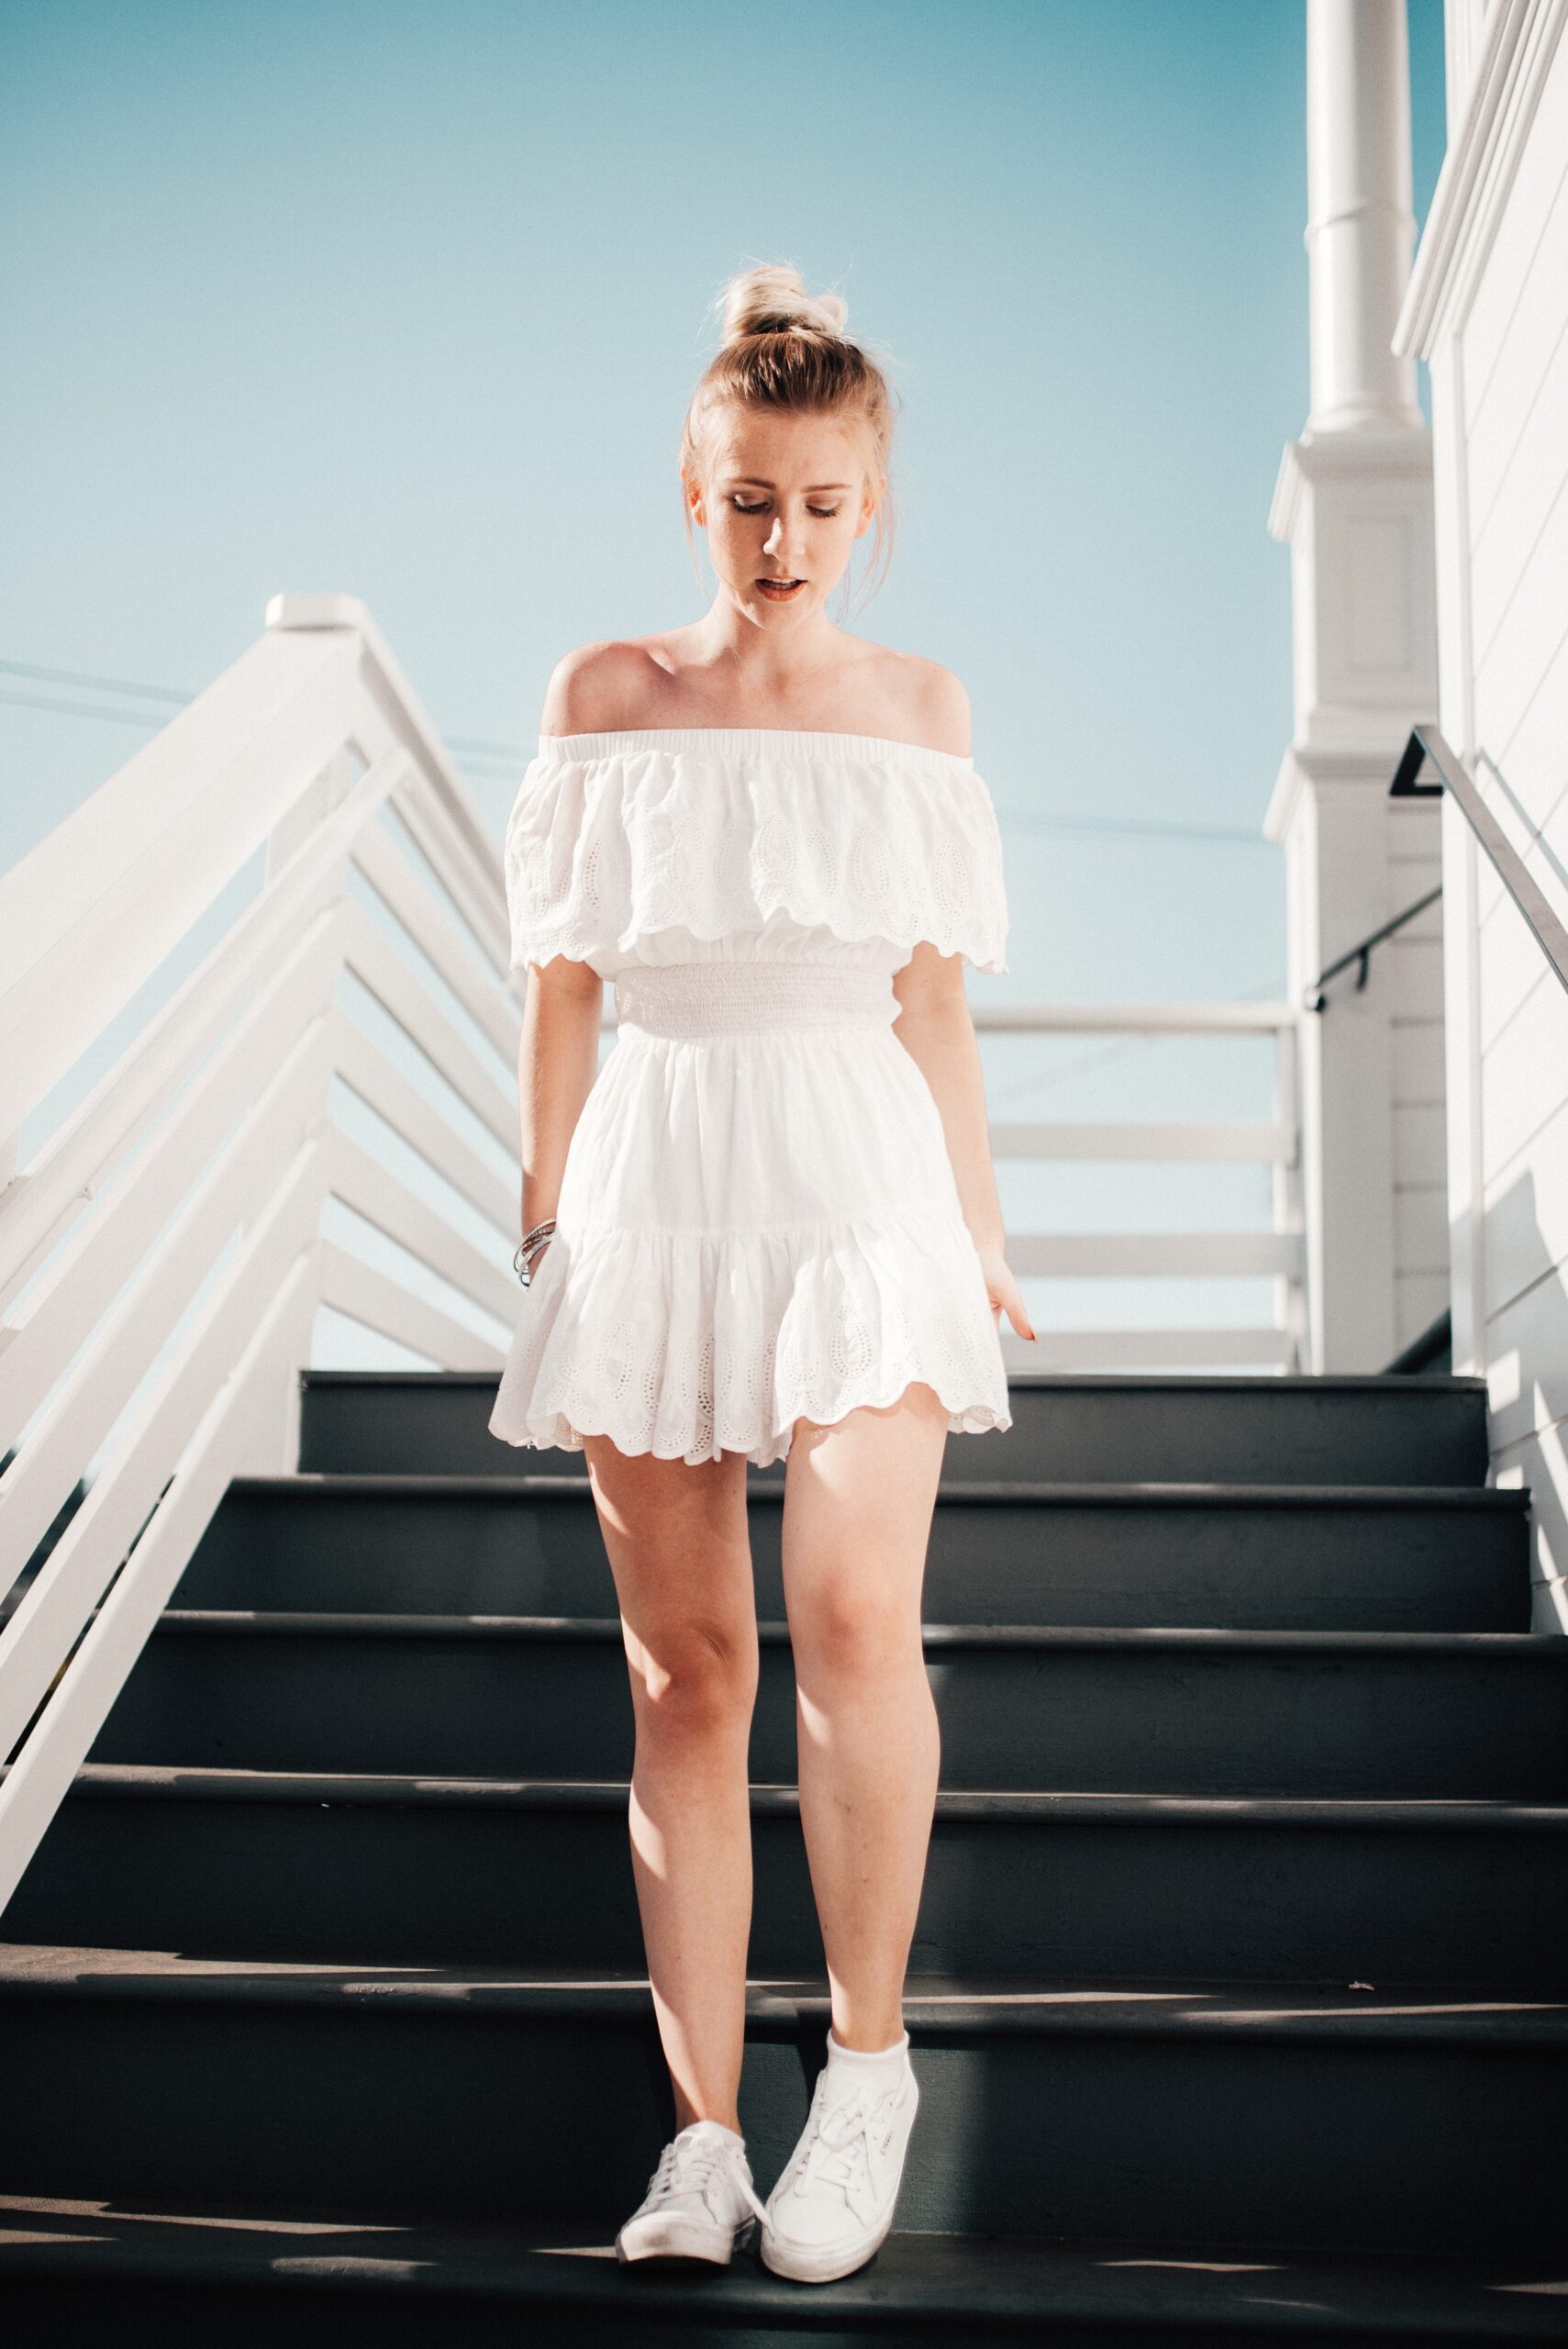 Woman walking downstairs wearing a white pirate-inspired dress